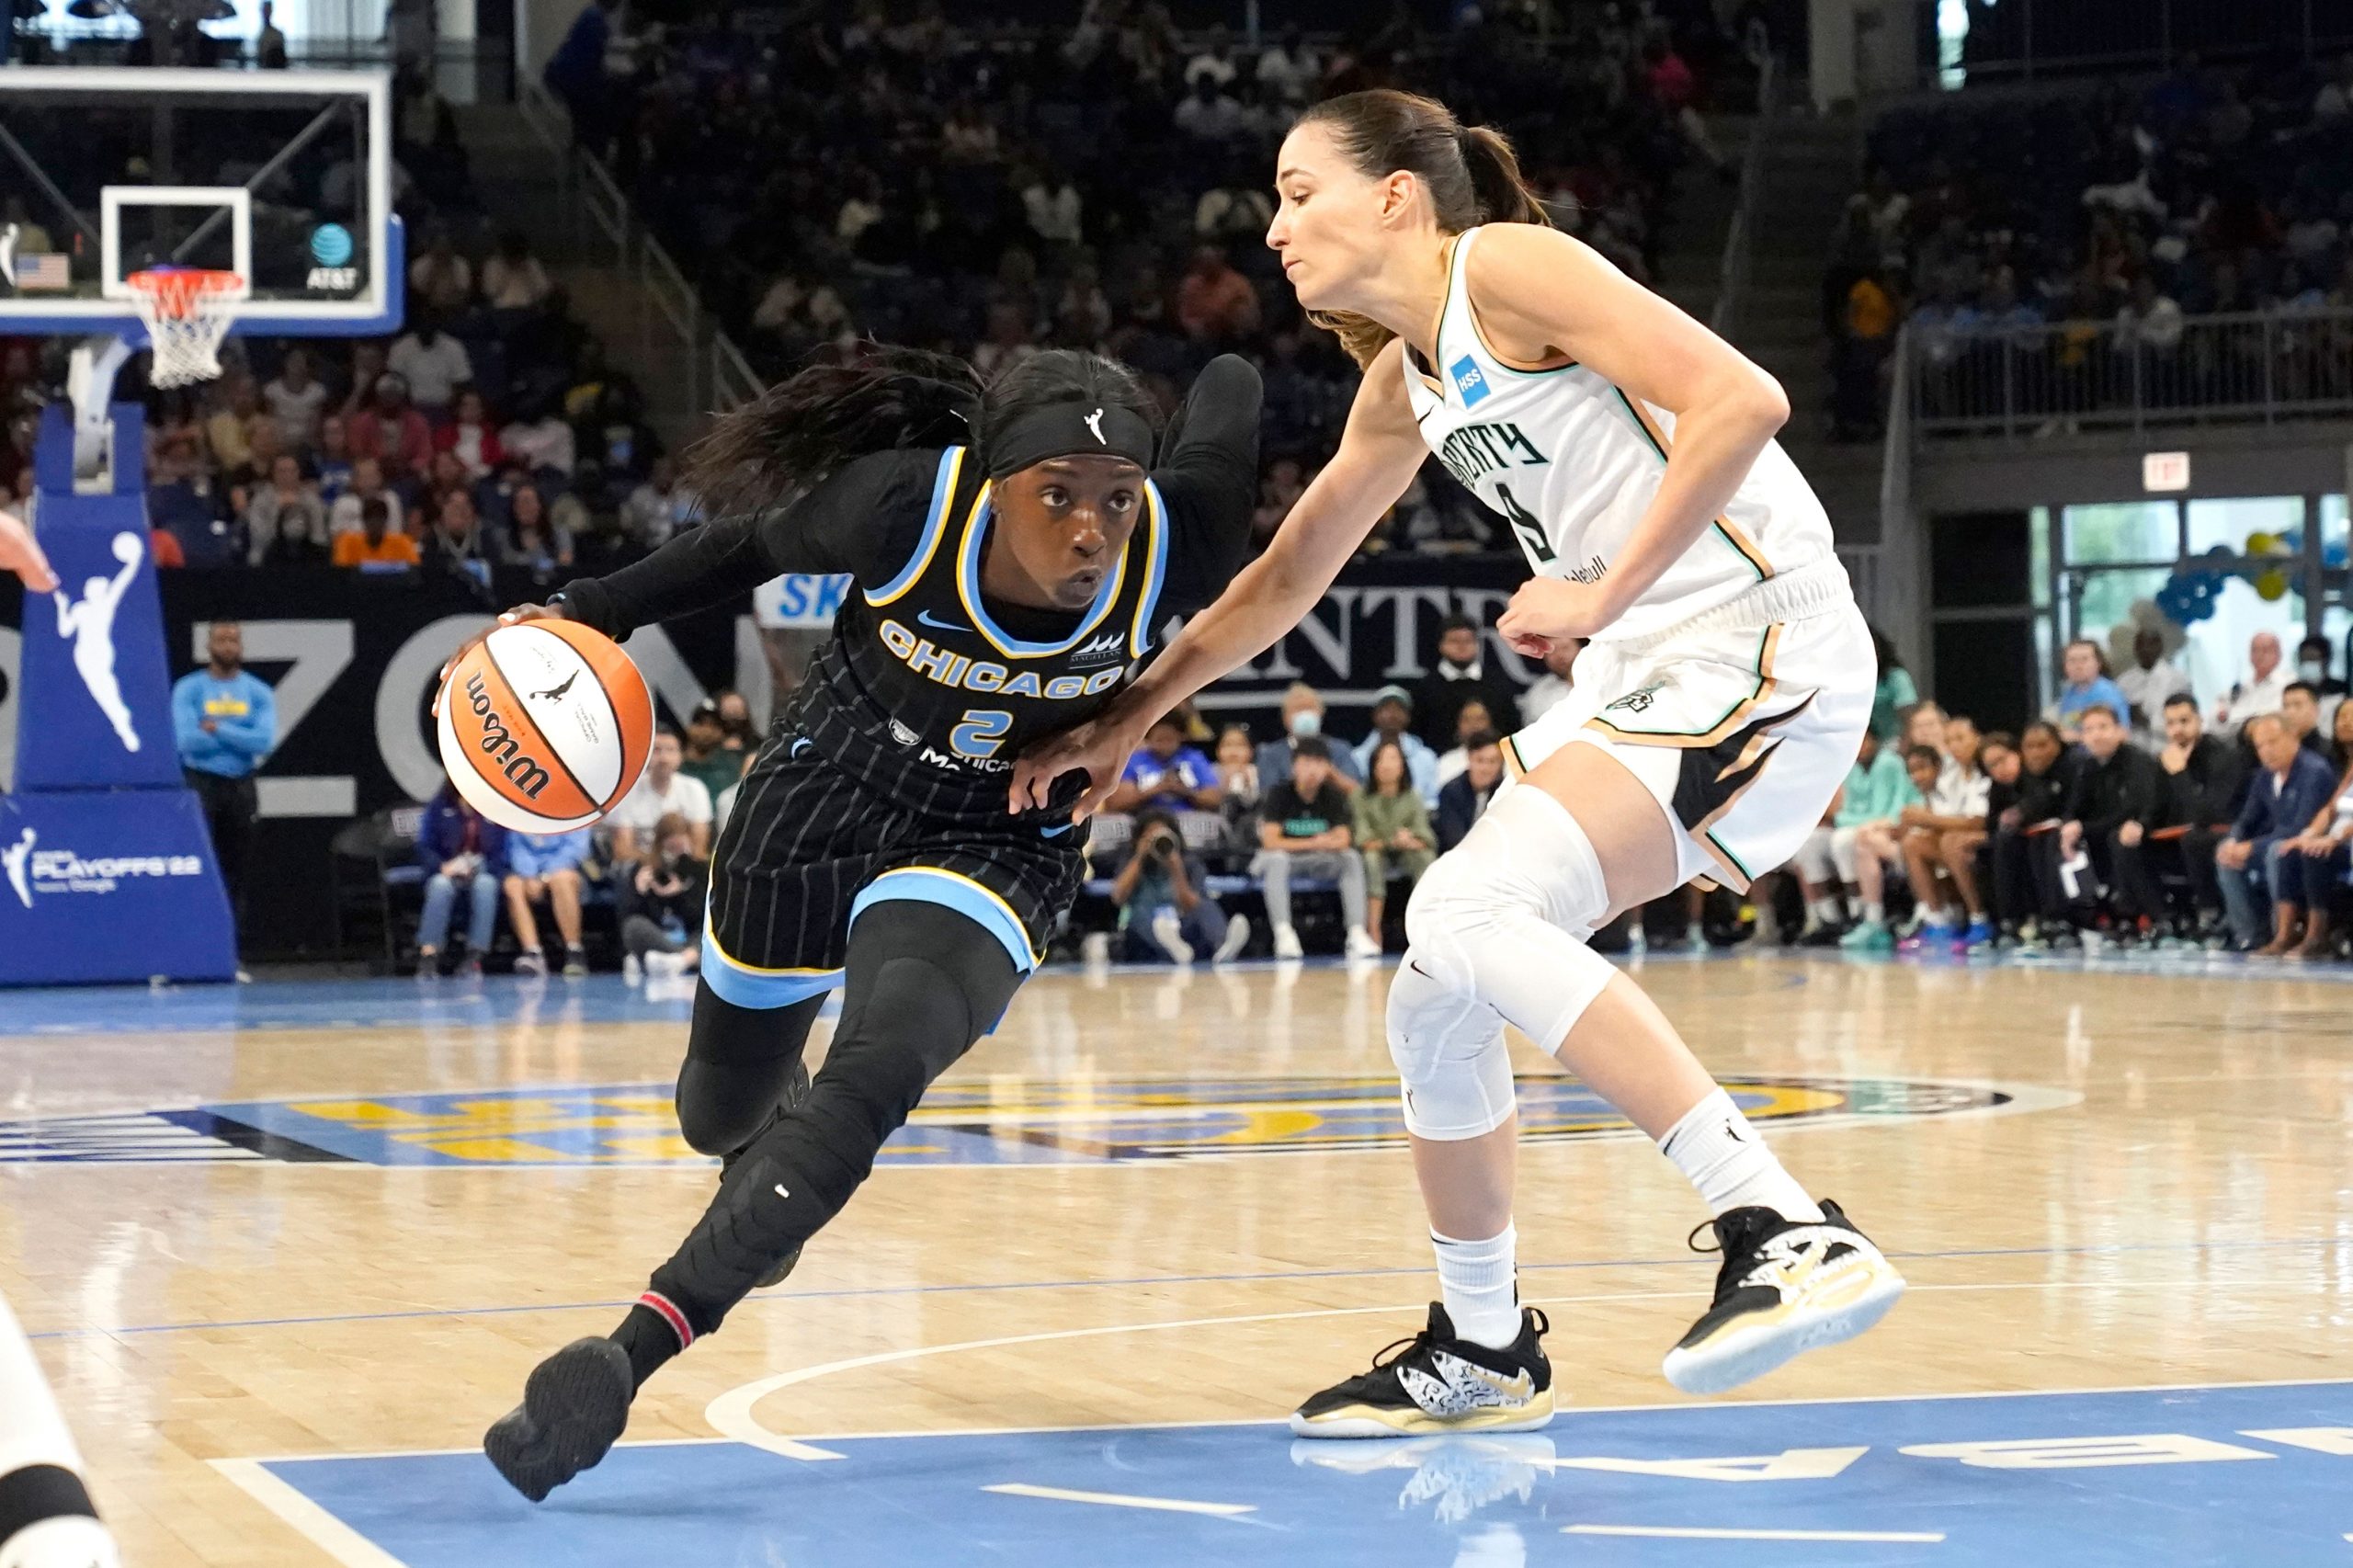 WNBA playoffs: Chicago Sky posts record rout of New York, forces Game 3